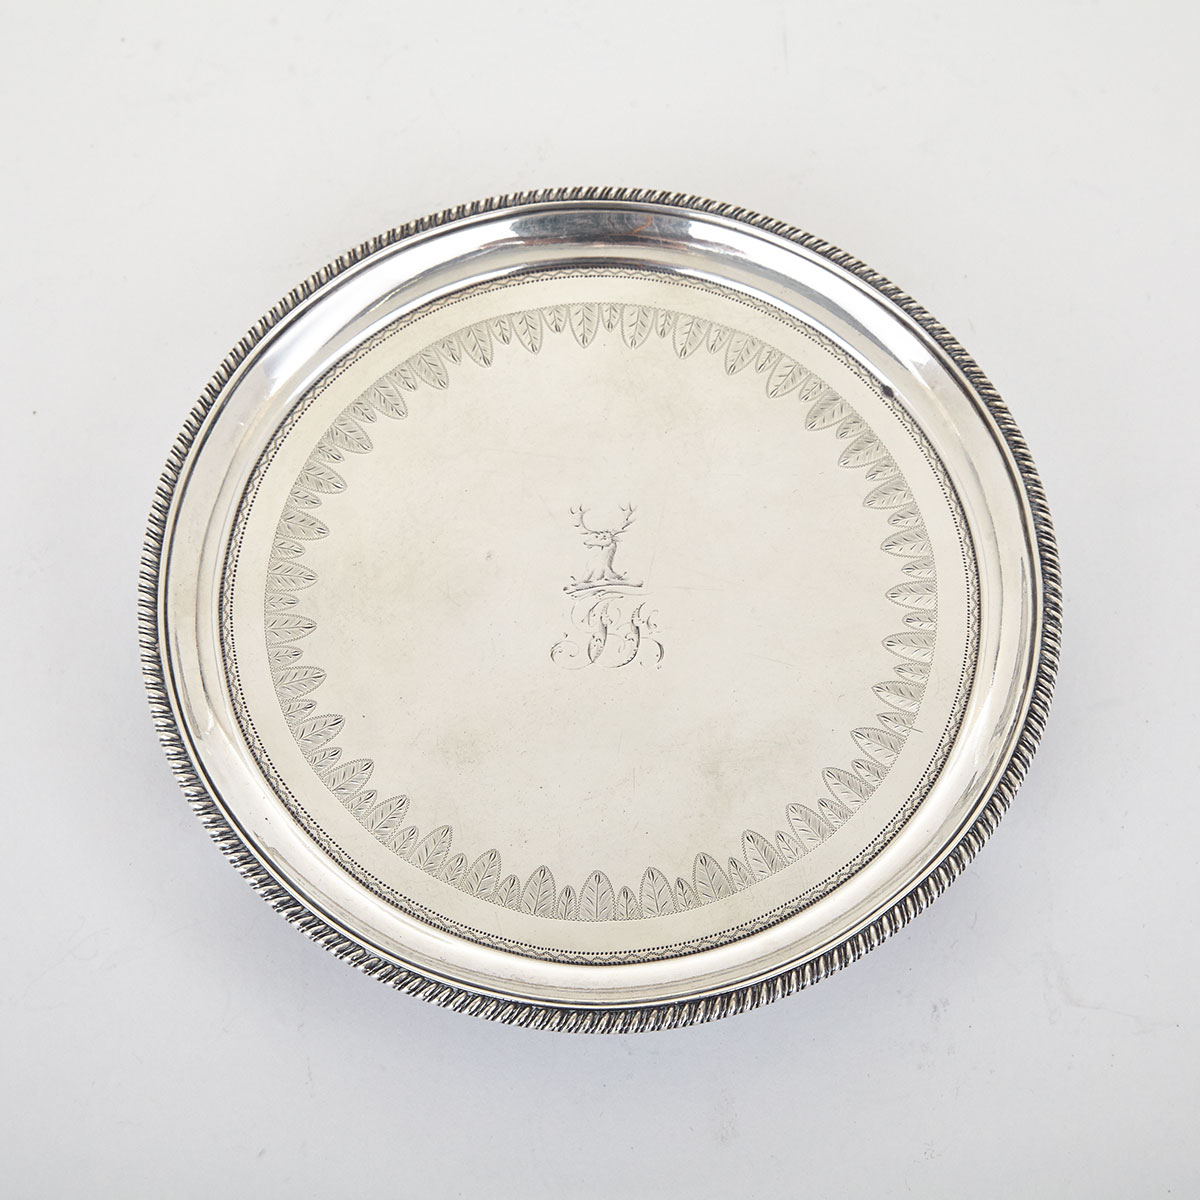 GEORGE III SILVER SMALL CIRCULAR SALVER, PETER & WILLIAM BATEMAN, LONDON, 1808 with moulded fine